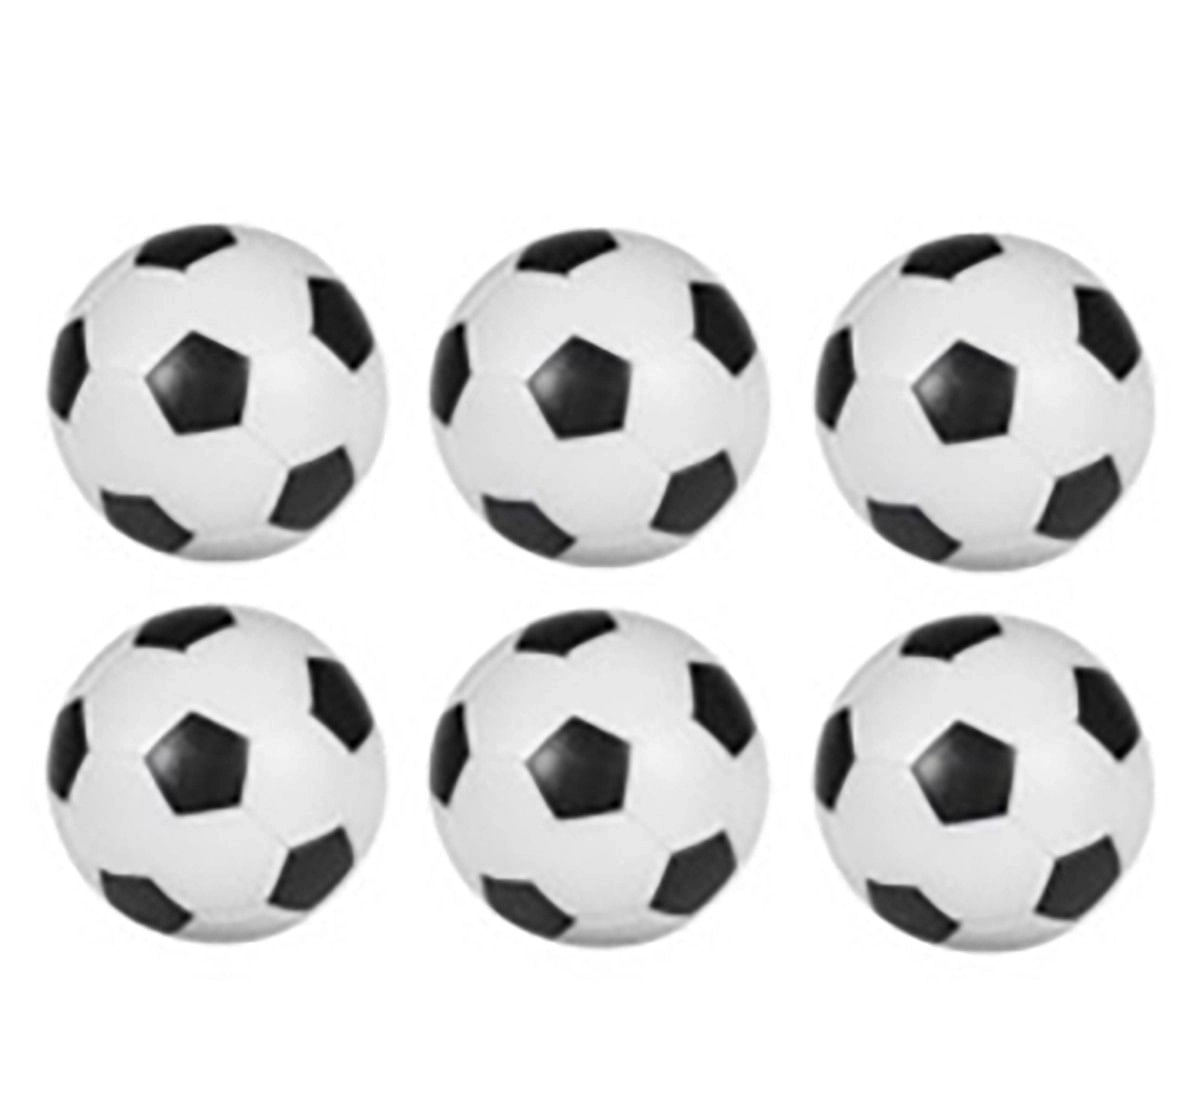 Carromco Foosball 28mm Balls Pack of 6 for Kids age 3Y+ (White)